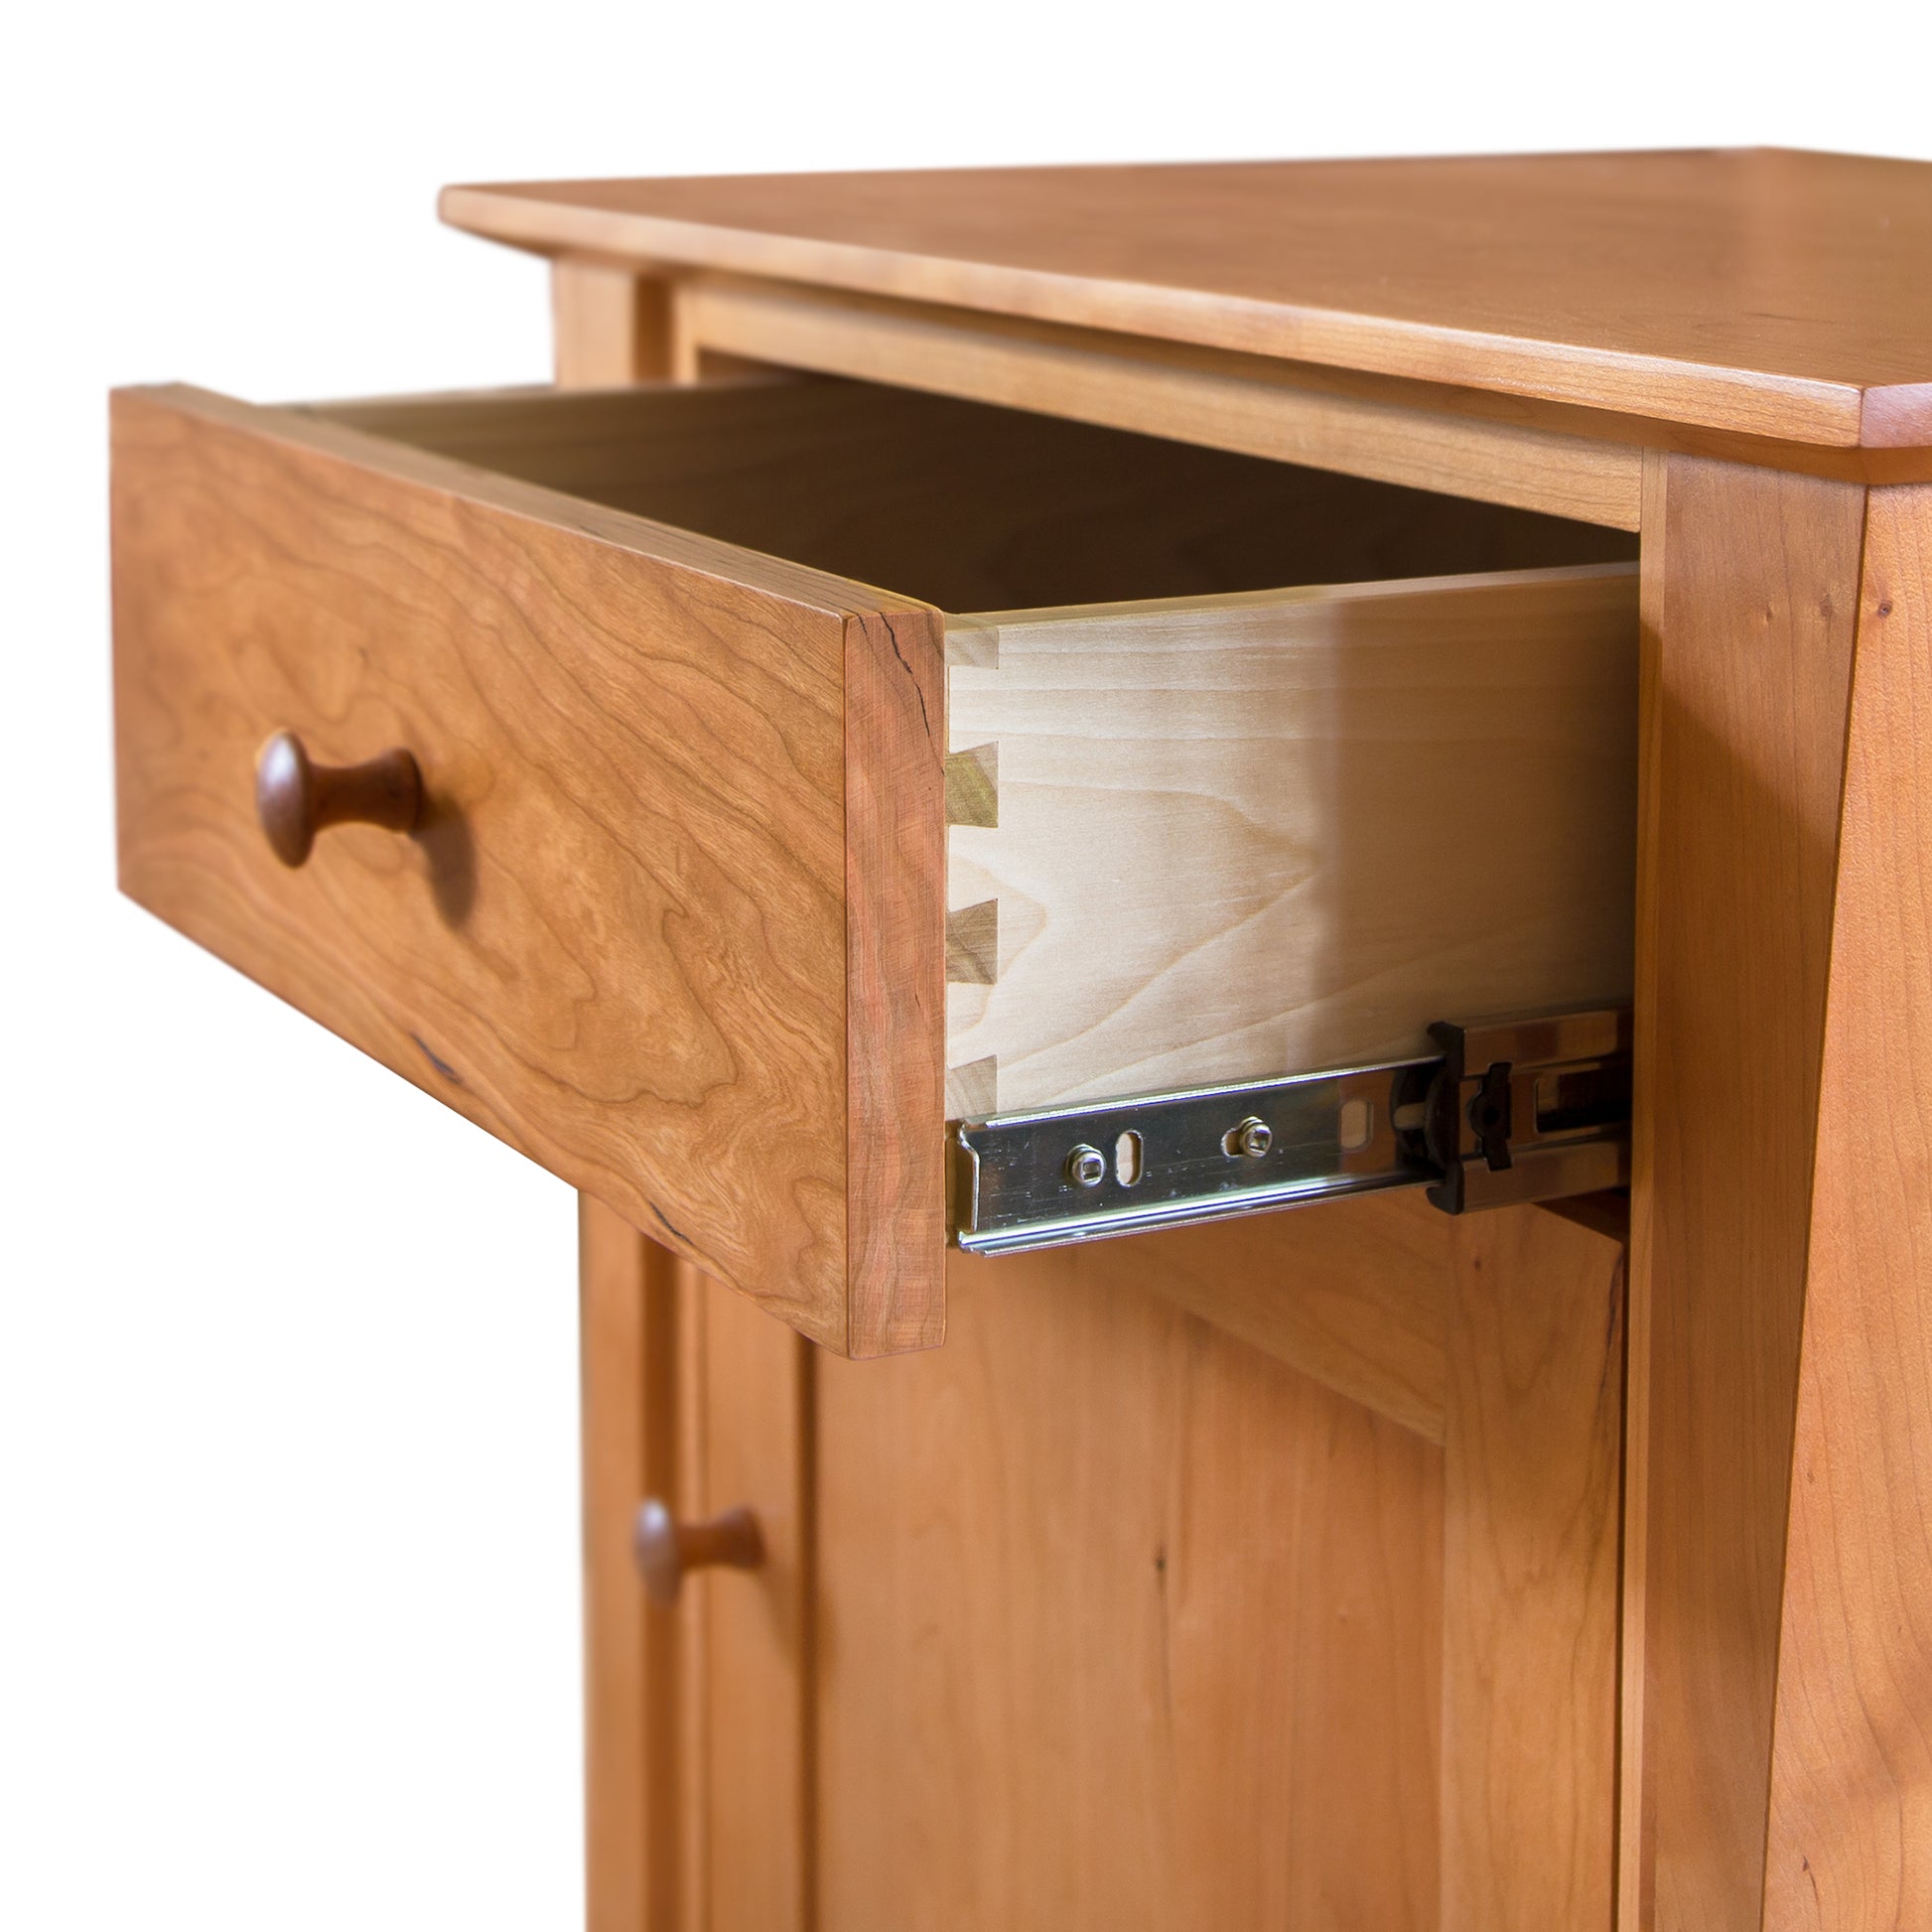 A Lyndon Furniture Andrews 1-Drawer Nightstand with Door is open on a wooden nightstand.